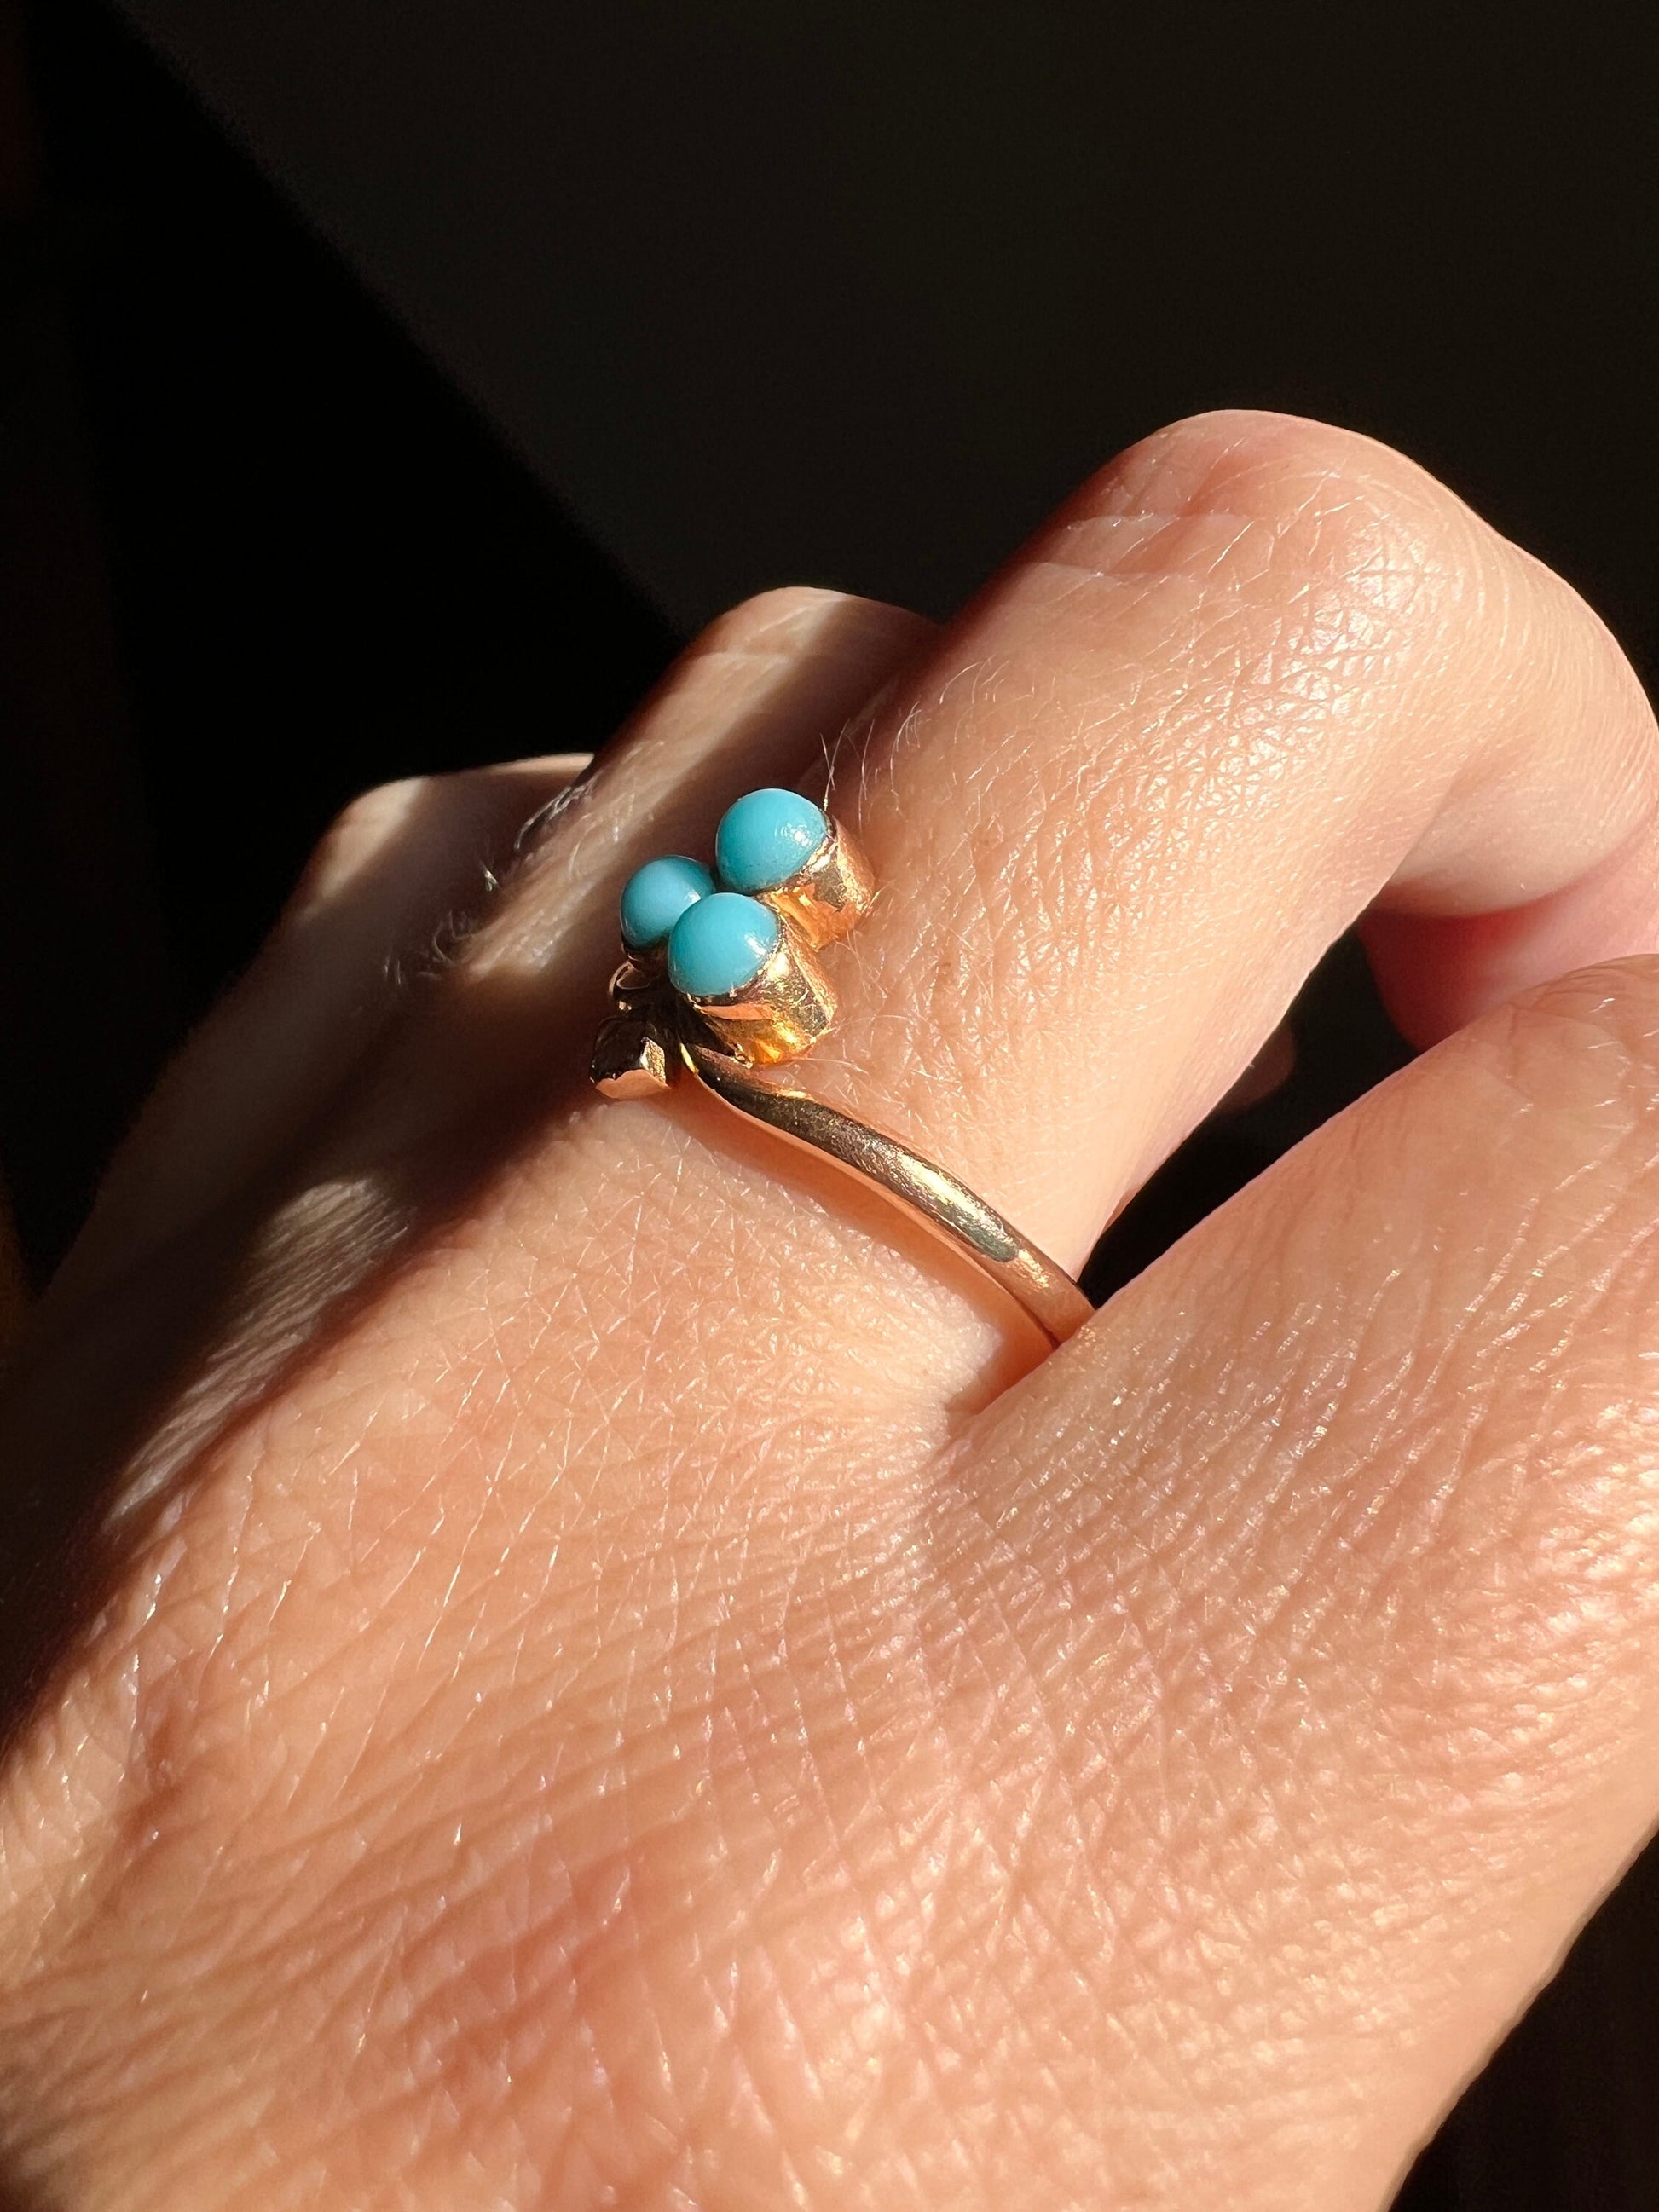 TURQUOISE Lucky CLOVER Rose Cut DIAMOND 18k Rose Gold French Antique Figural Ring Victorian Belle Epoque Stacker Romantic Gift Blue Tiara